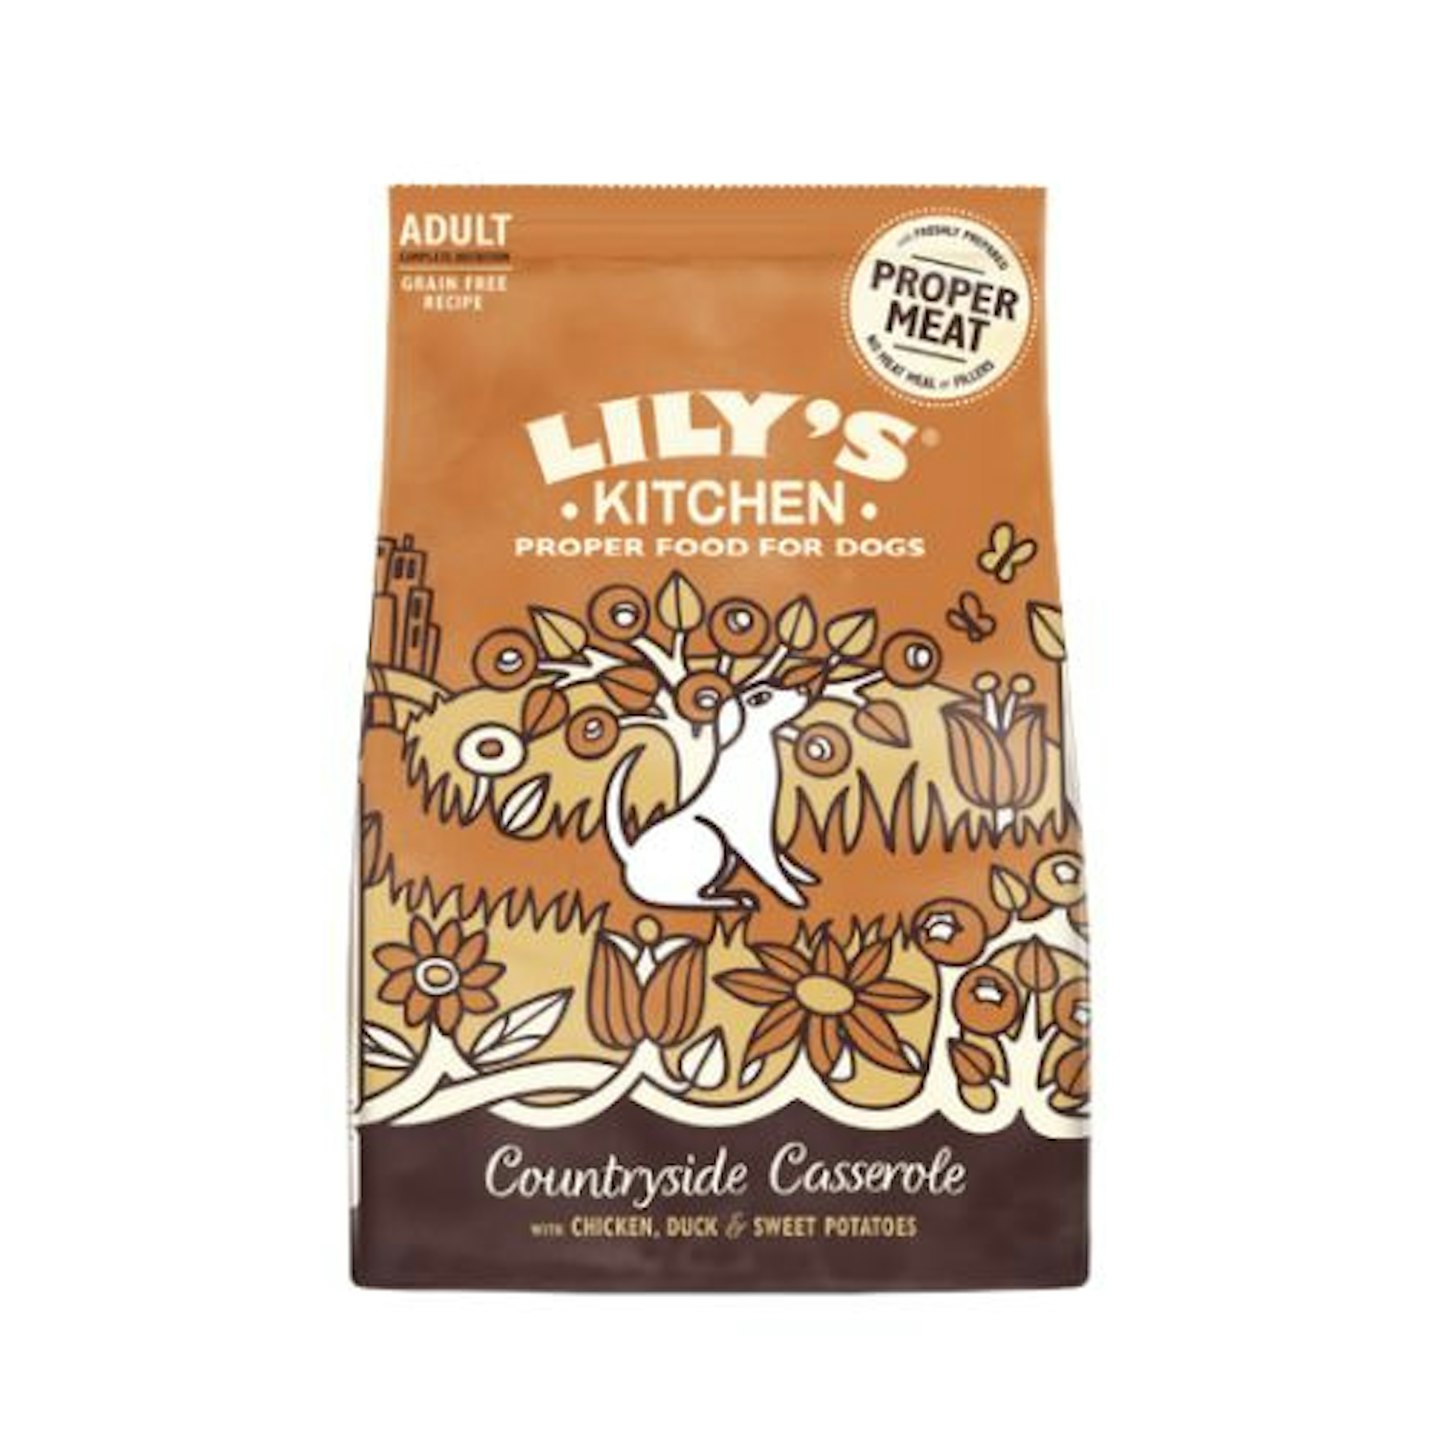 Lily's Kitchen Chicken and Duck Dry Food